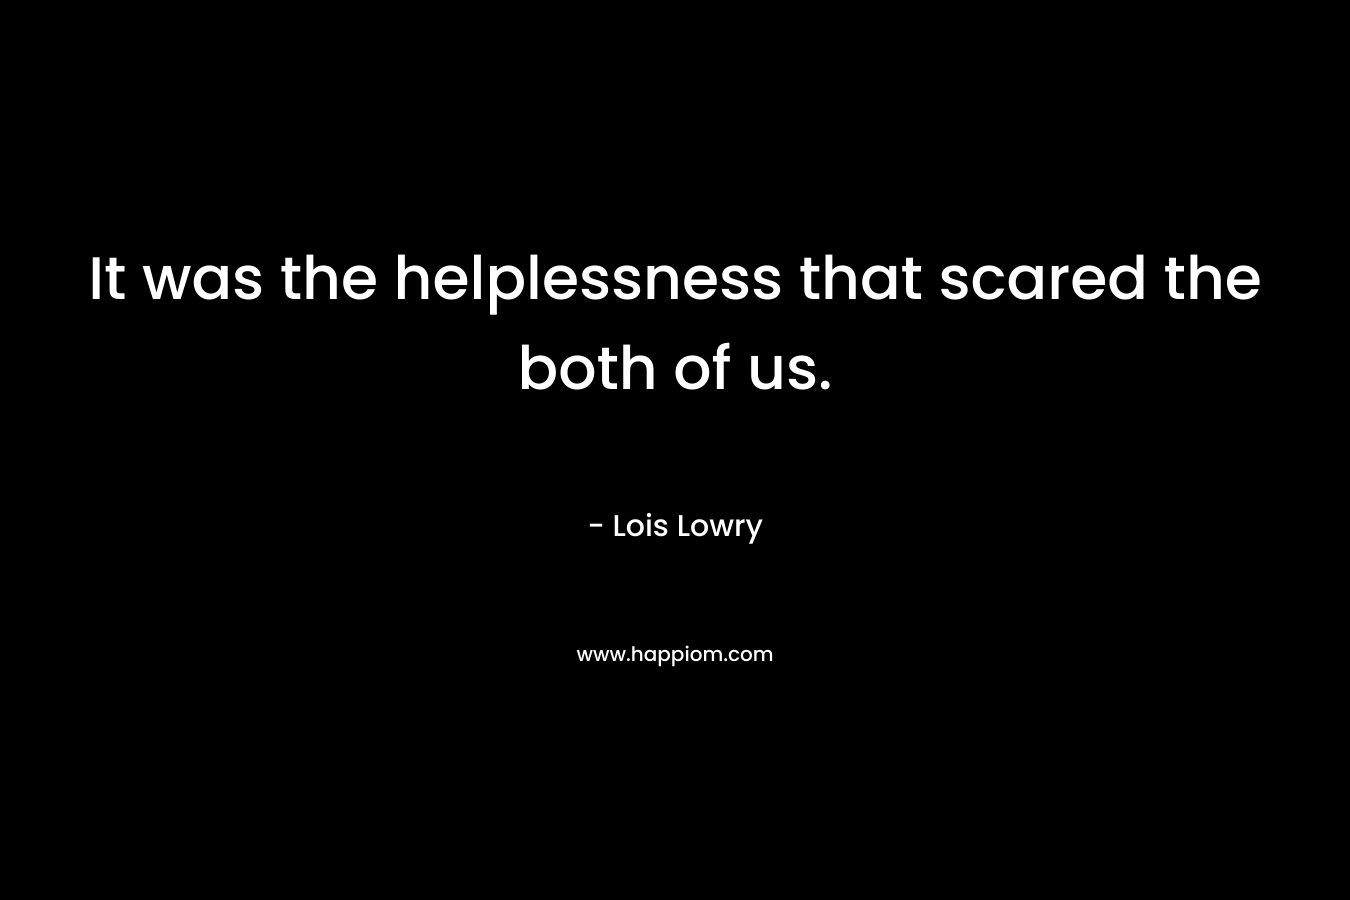 It was the helplessness that scared the both of us. – Lois Lowry